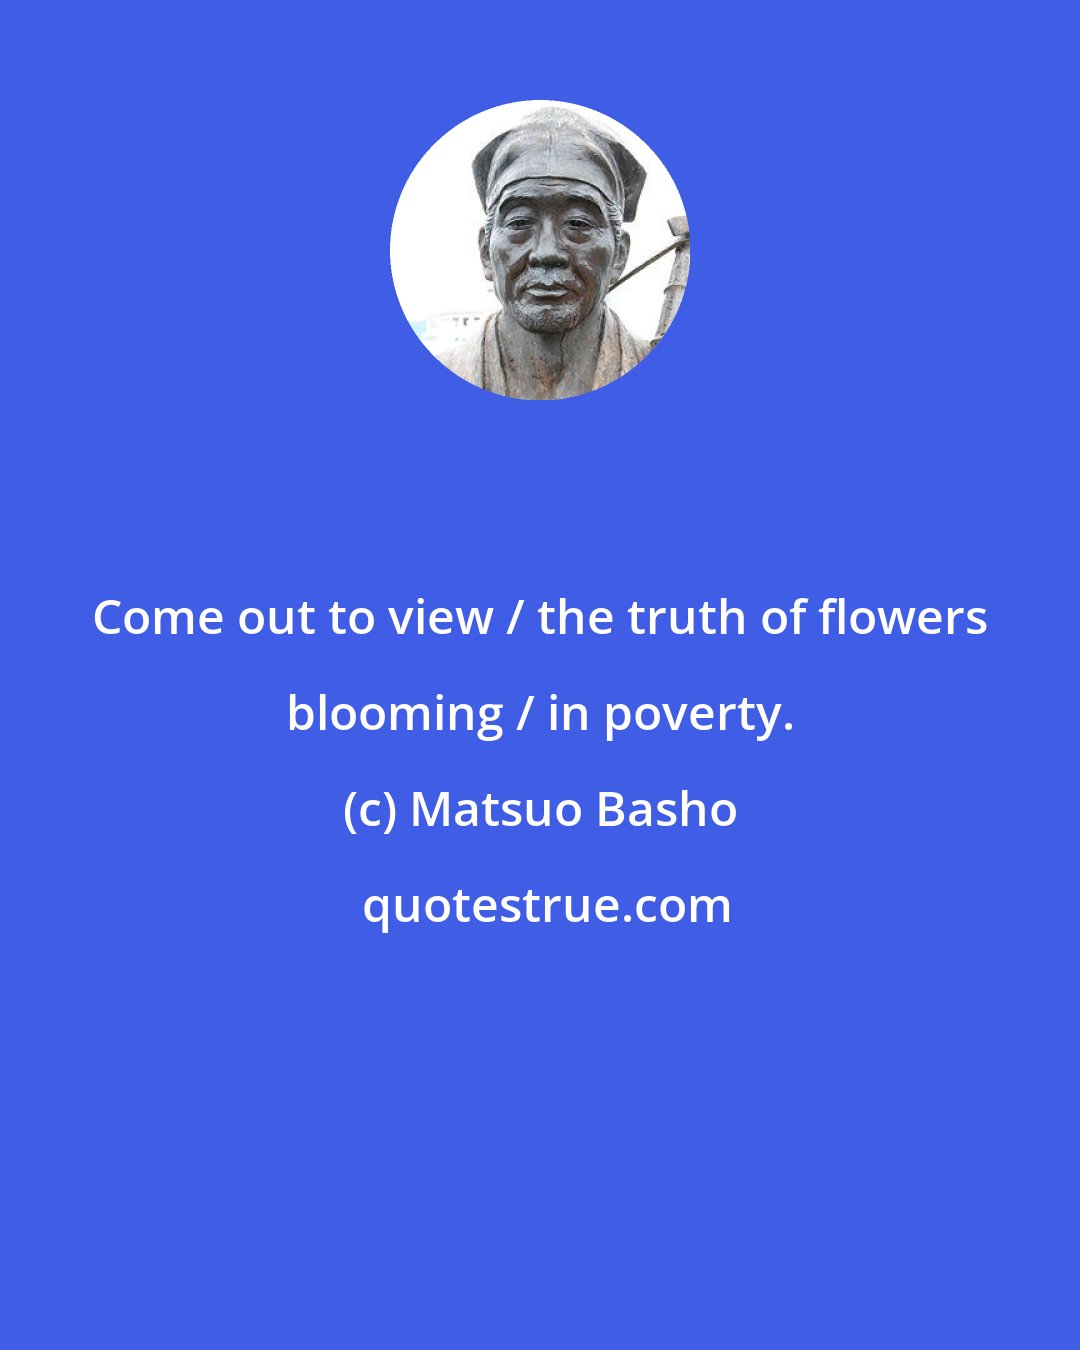 Matsuo Basho: Come out to view / the truth of flowers blooming / in poverty.